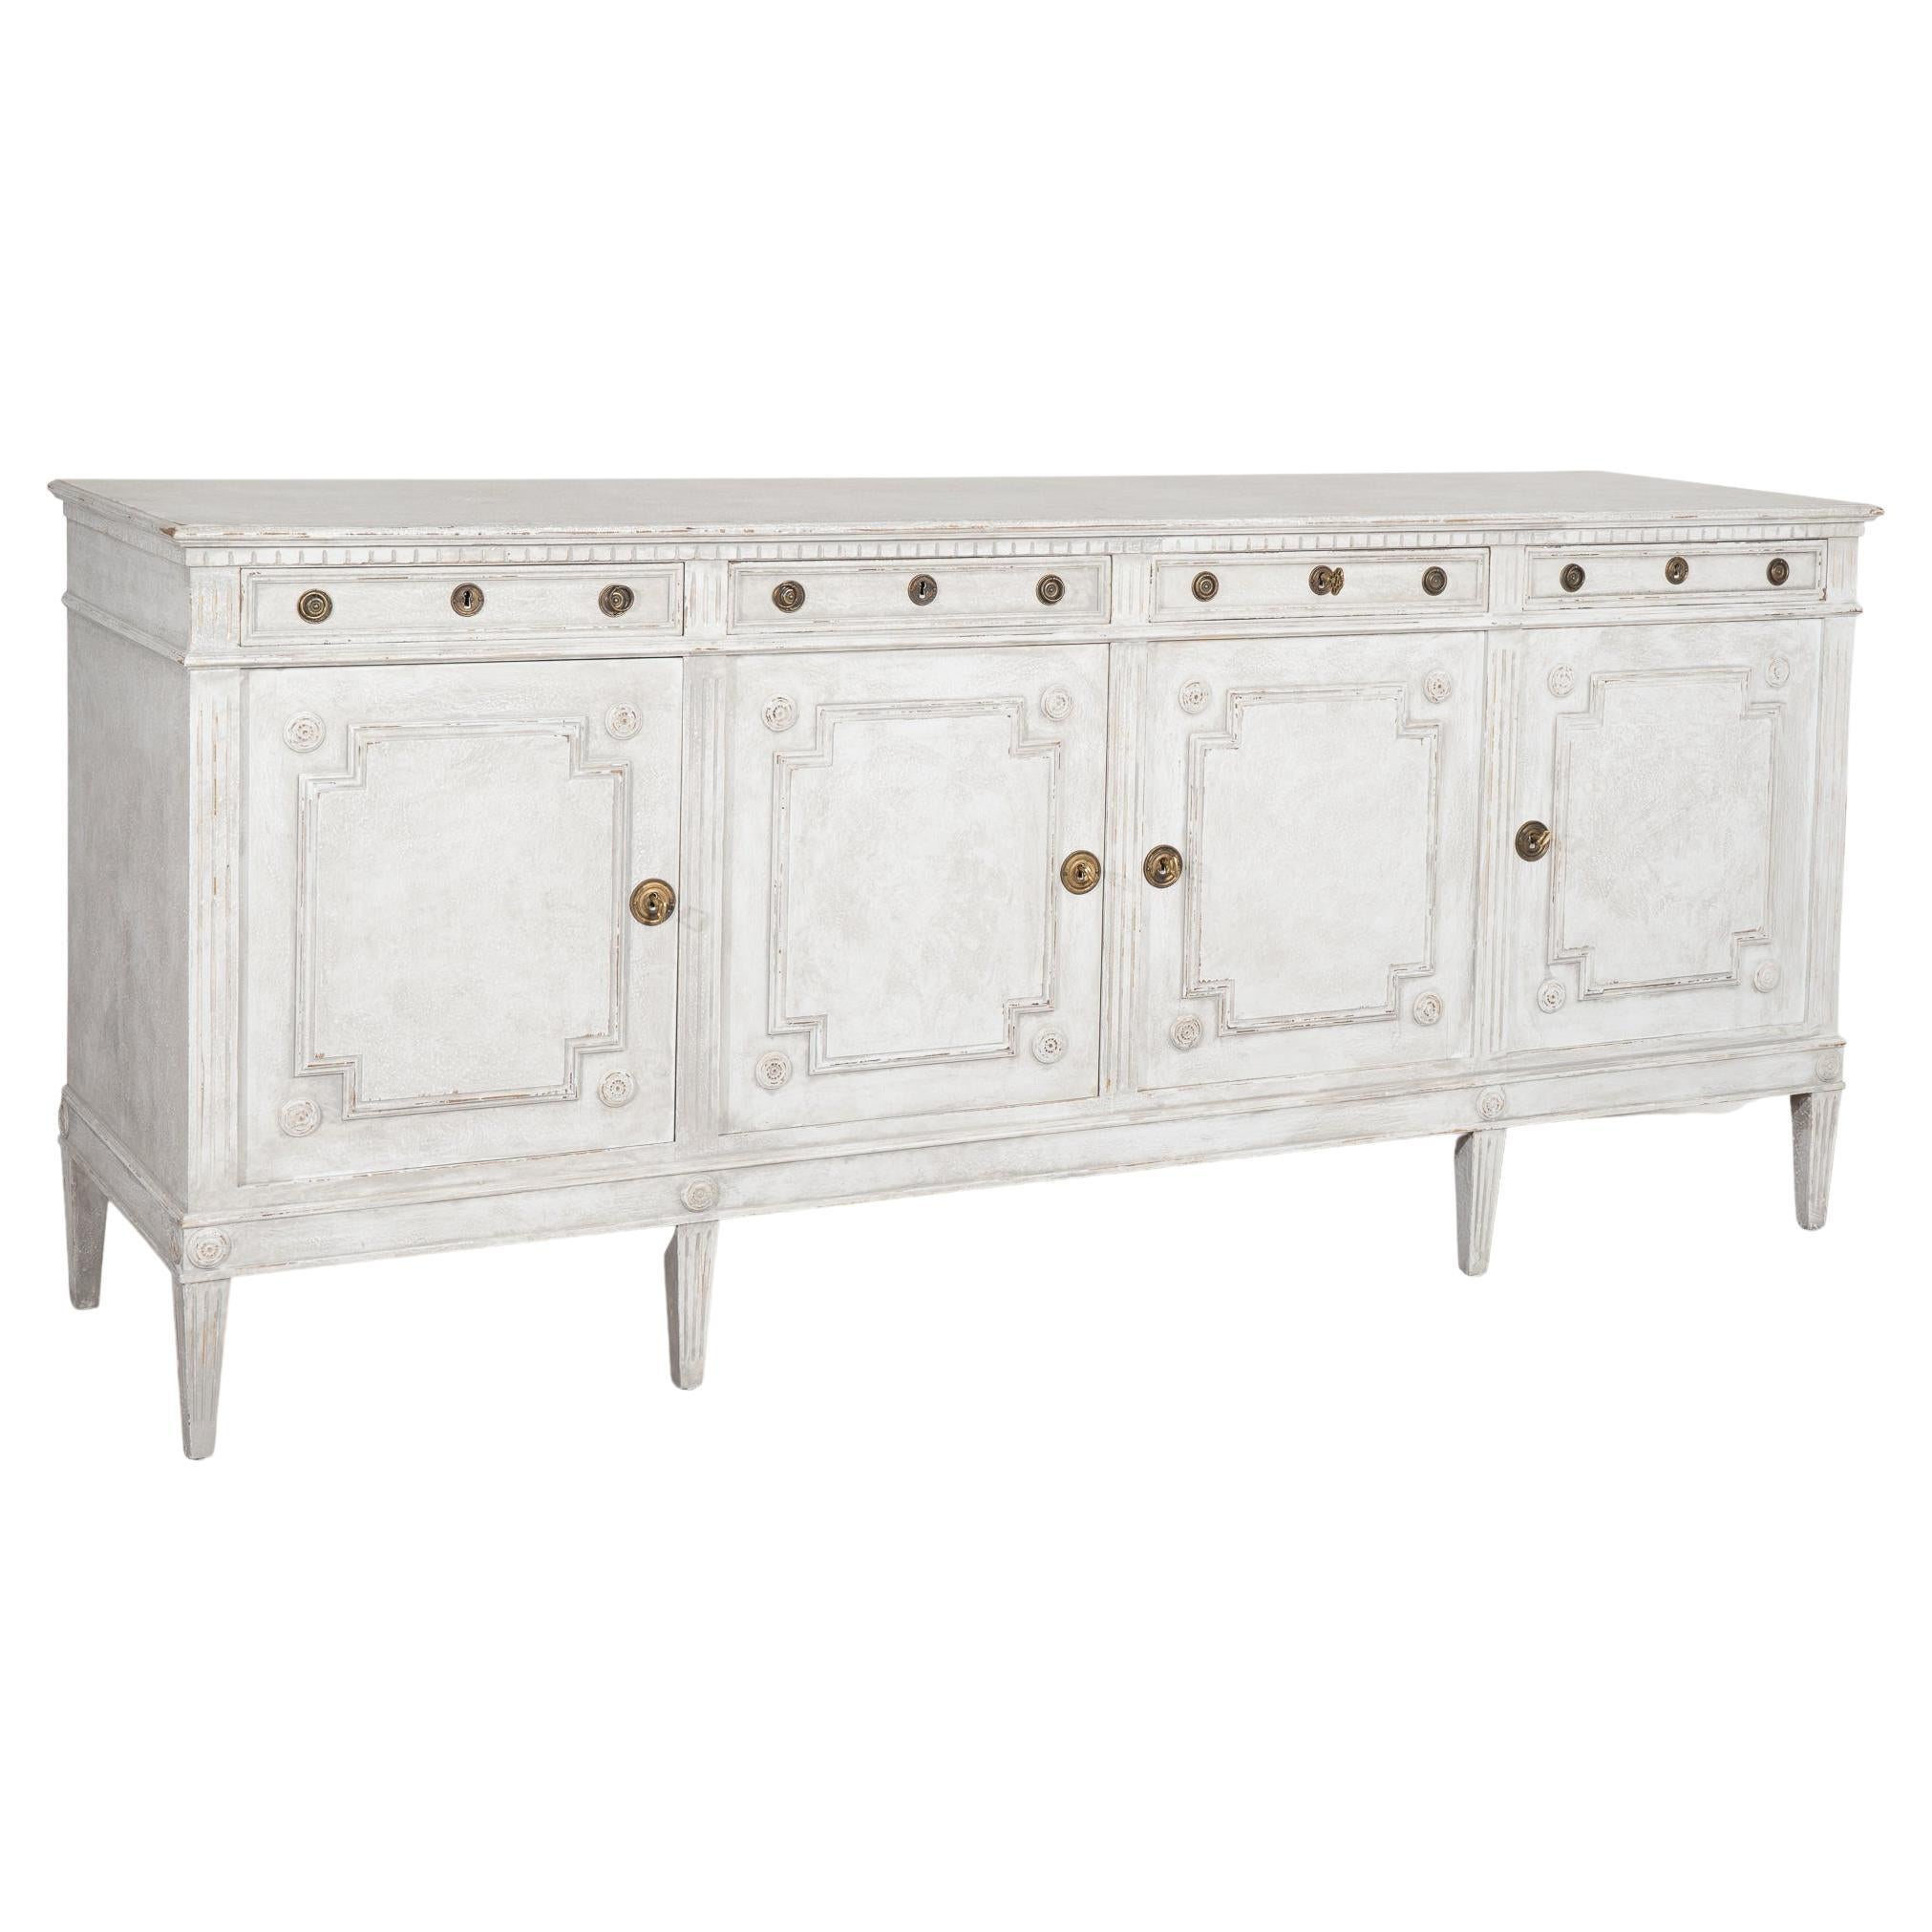 Gray Painted Long Sideboard Buffet from Denmark, circa 1920